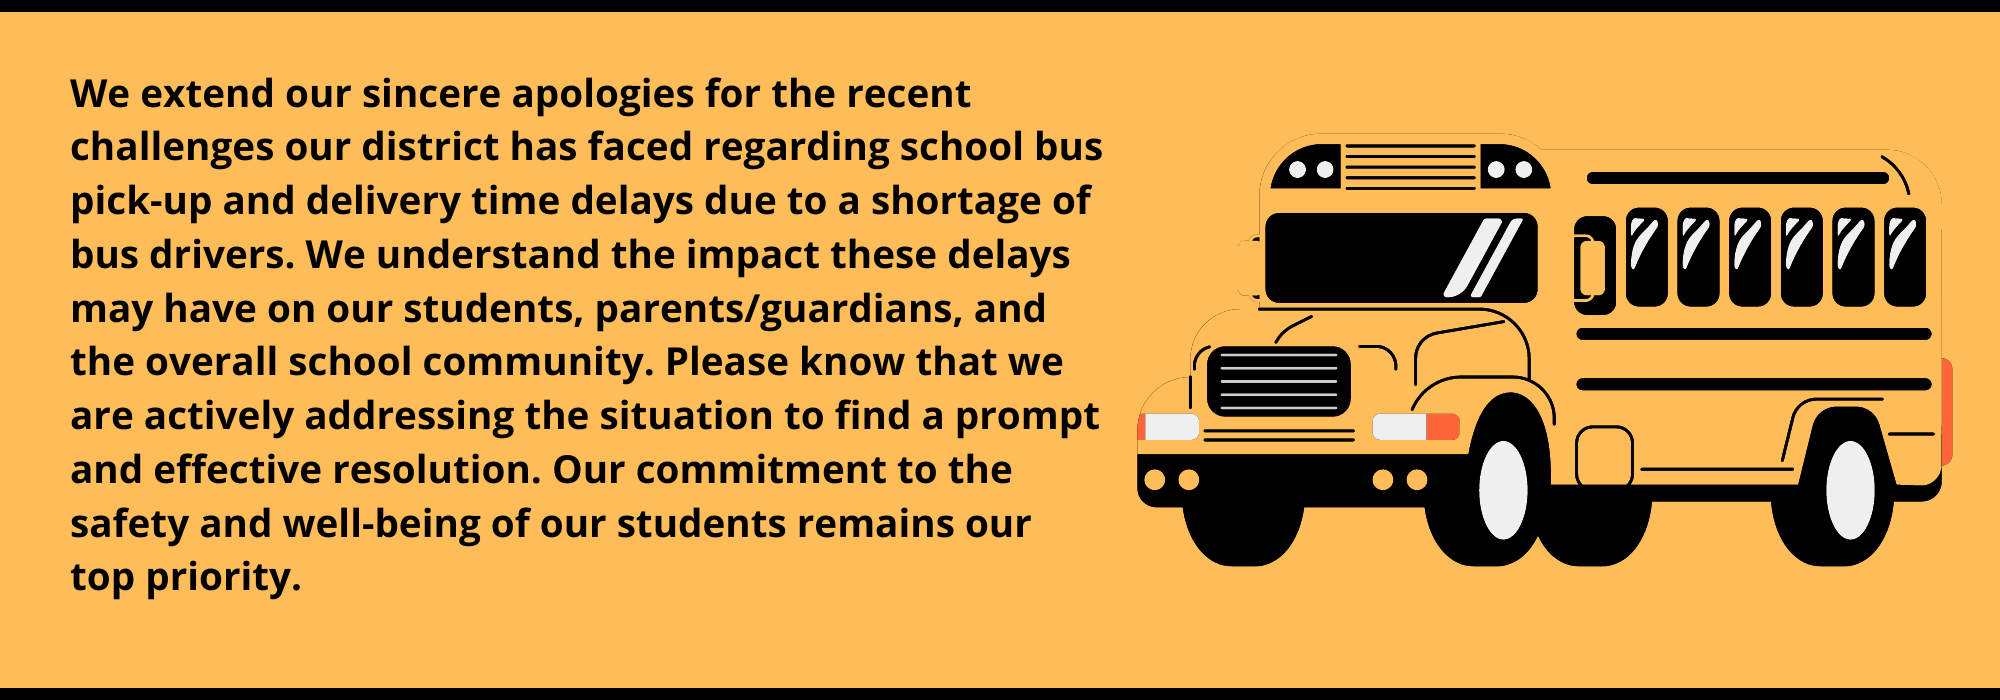 We extend our sincere apologies for the recent challenges our district has faced regarding school bus pick-up and delivery time delays due to a shortage of bus drivers. We understand the impact these delays may have on our students, parents/guardians, and the overall school community. Please know that we are actively addressing the situation to find a prompt and effective resolution. Our commitment to the safety and well-being of our students remains our top priority.